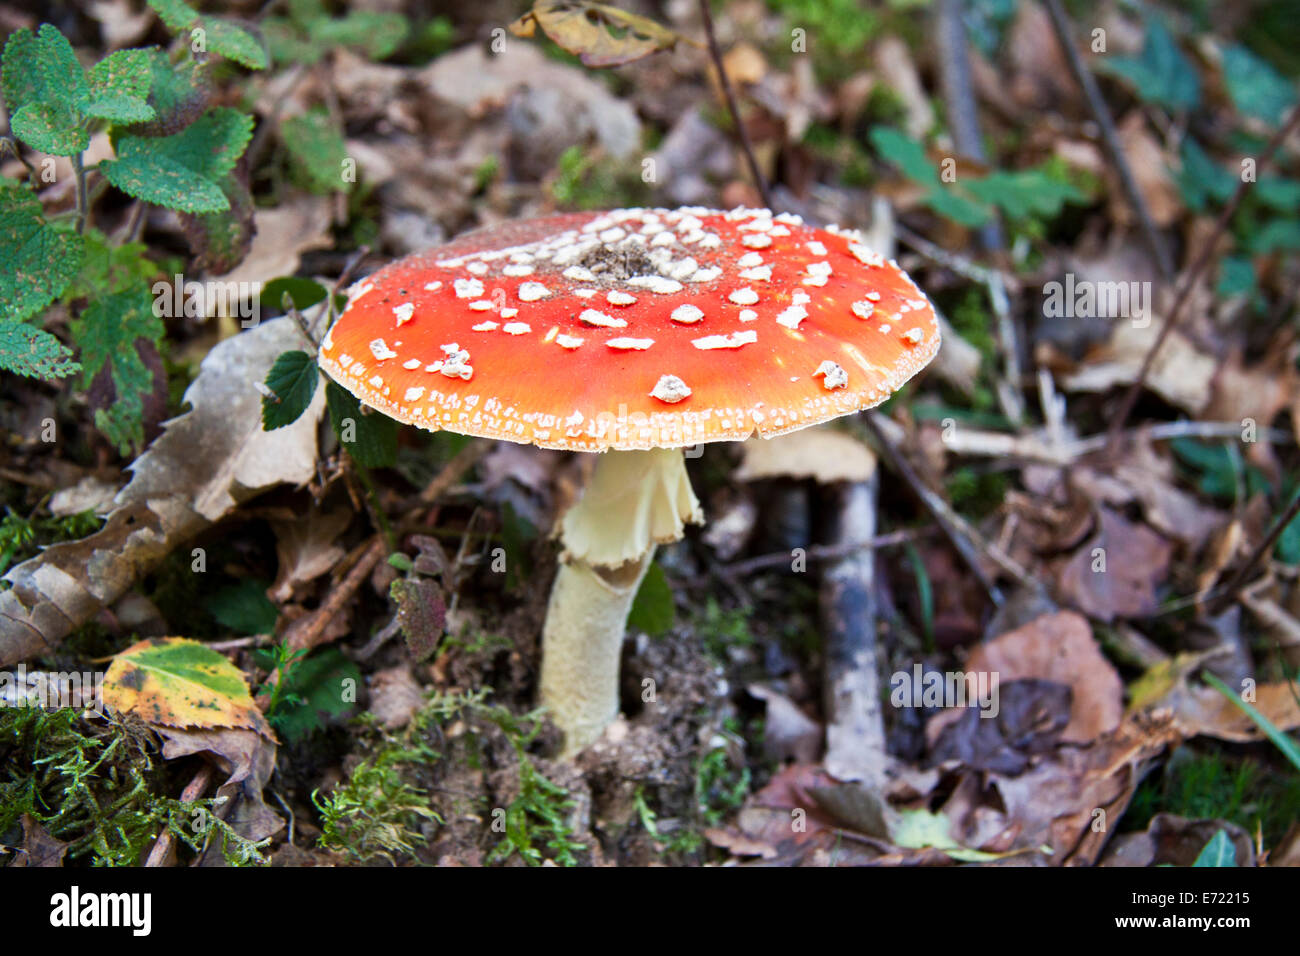 Red white spotted mushroom in the forest Stock Photo